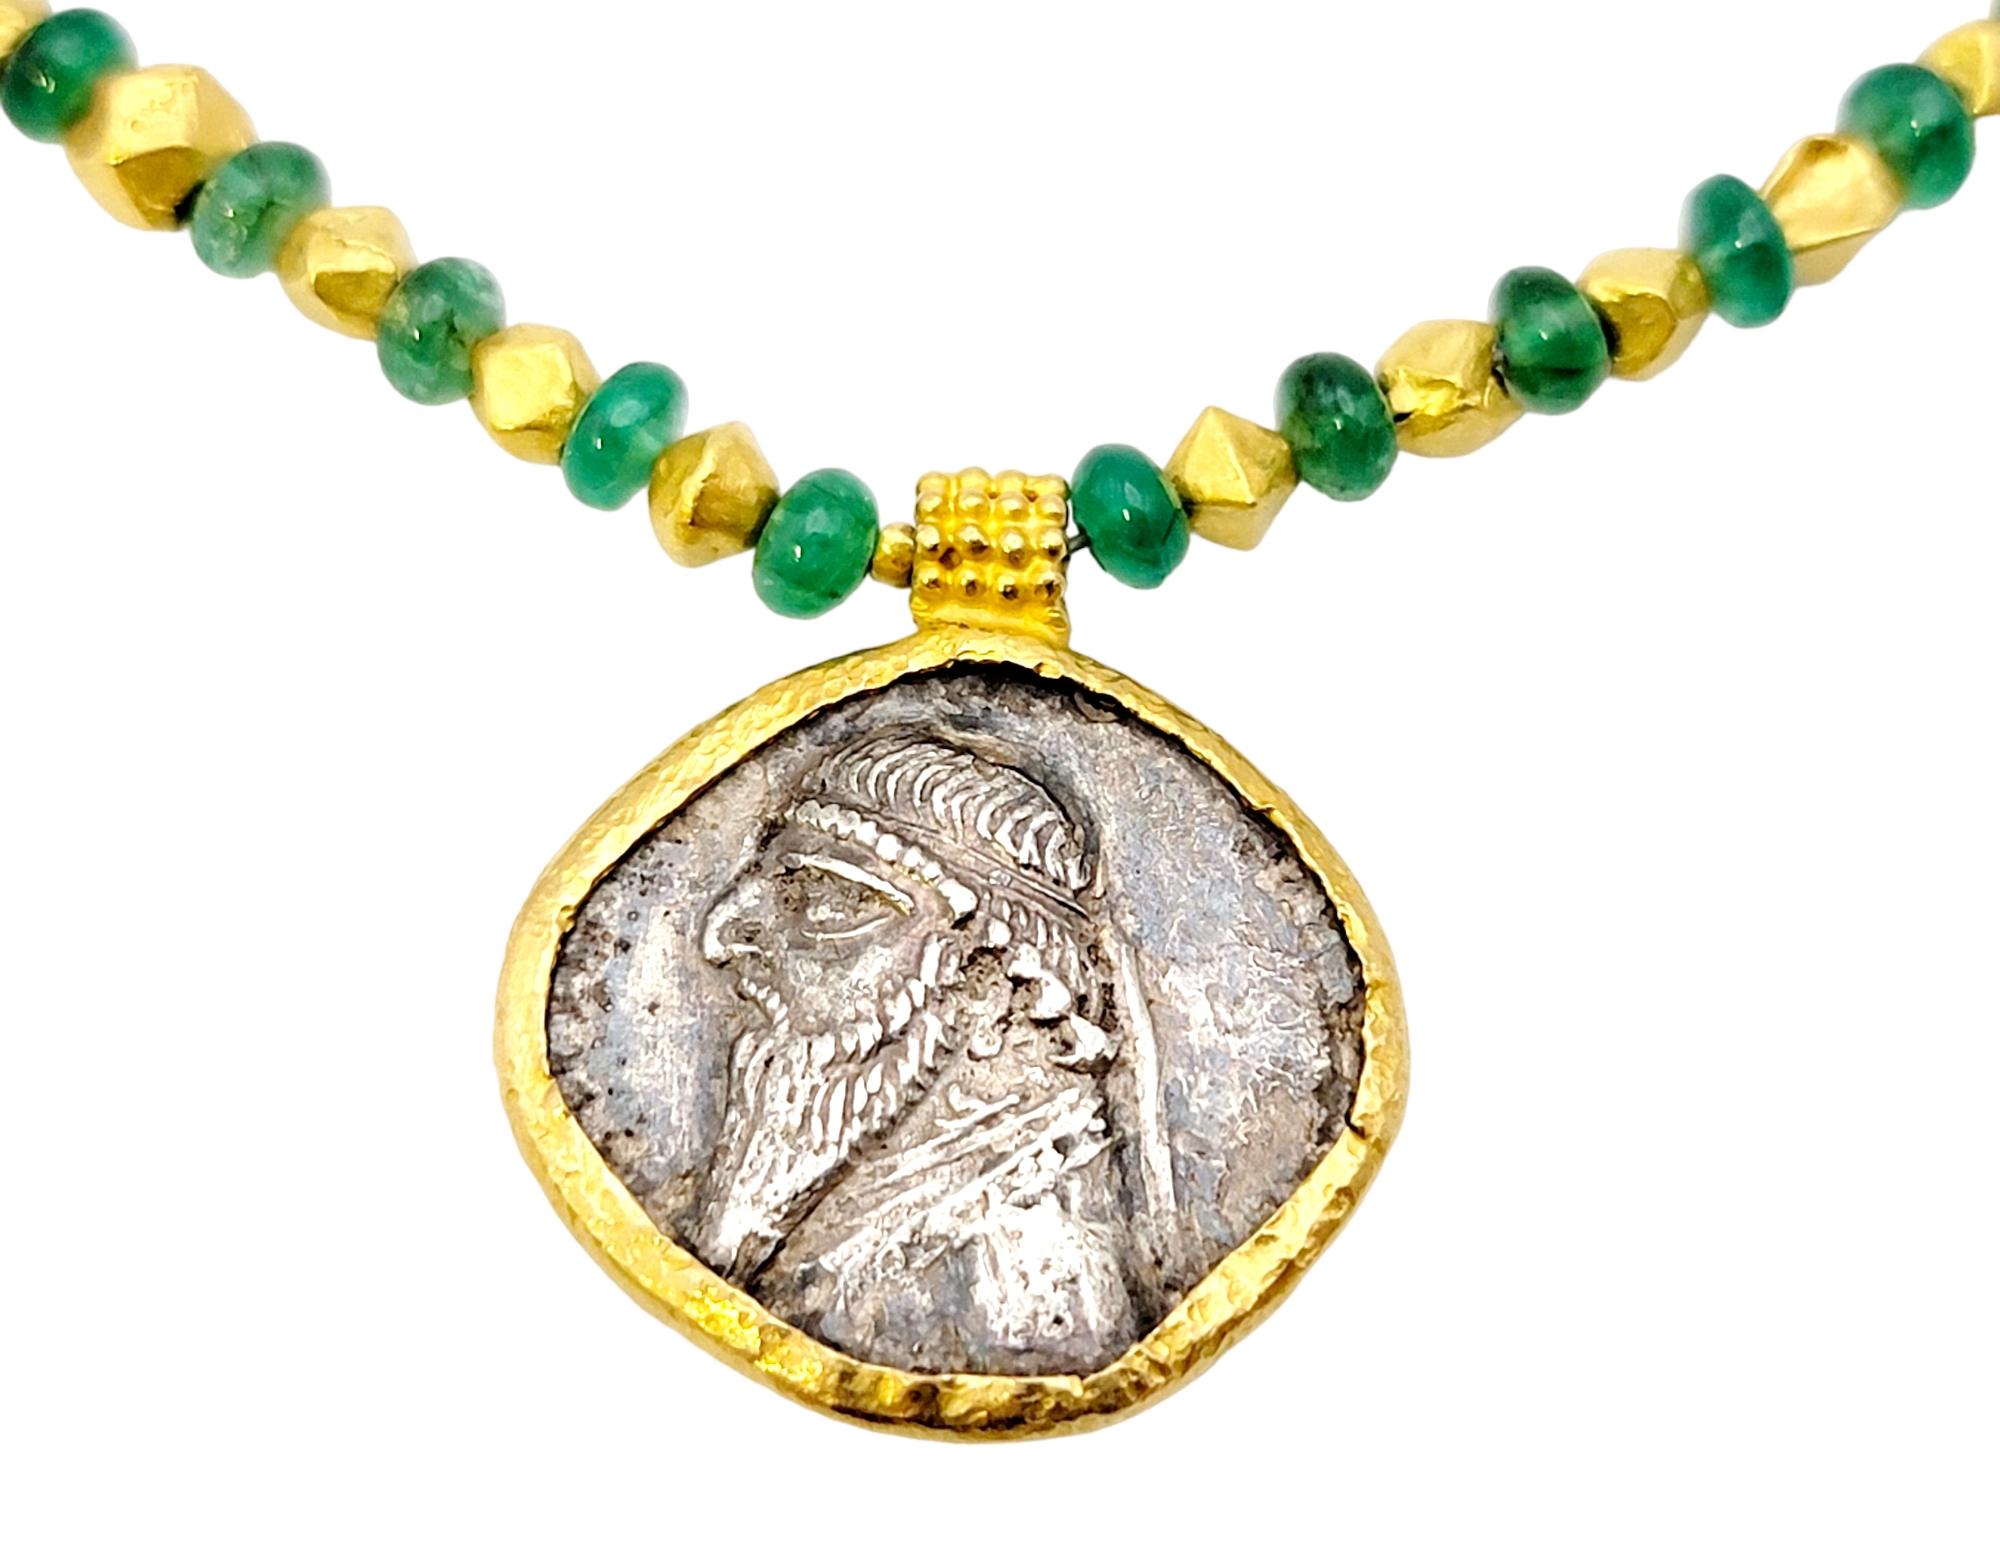 Ancient silver Tetradrachm of Mithridates II coin pendant necklace paired with stunning emerald beads. The impressive coin was created around 109-95 BC and still has its incredible details visible! 

This unique piece features the original silver